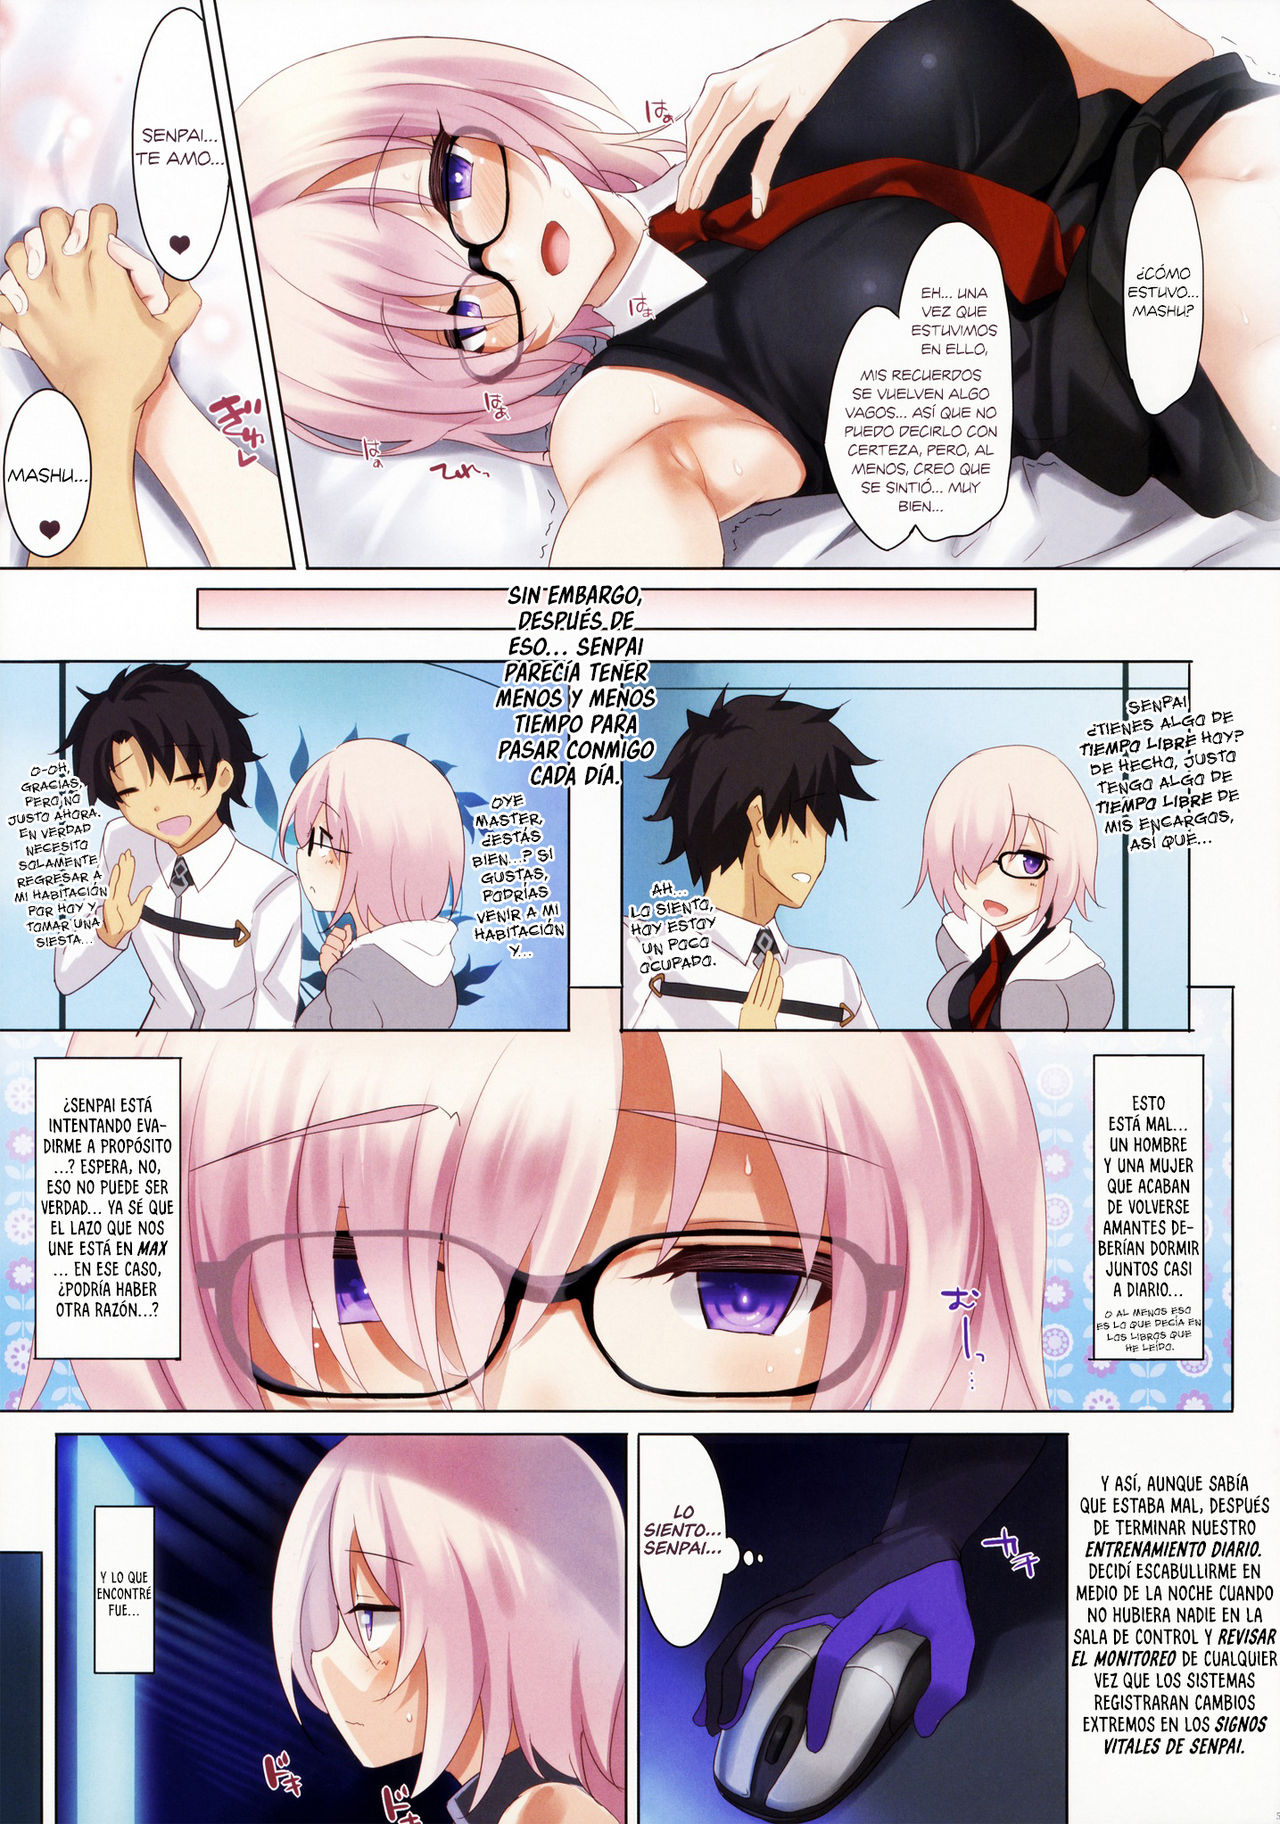 (C92) [clesta (Cle Masahiro)] CL-orz 53 (Fate/Grand Order) [Spanish] [Oni Twinscans] (C92) [クレスタ (呉マサヒロ)] CL-orz 53 (Fate/Grand Order) [スペイン翻訳]